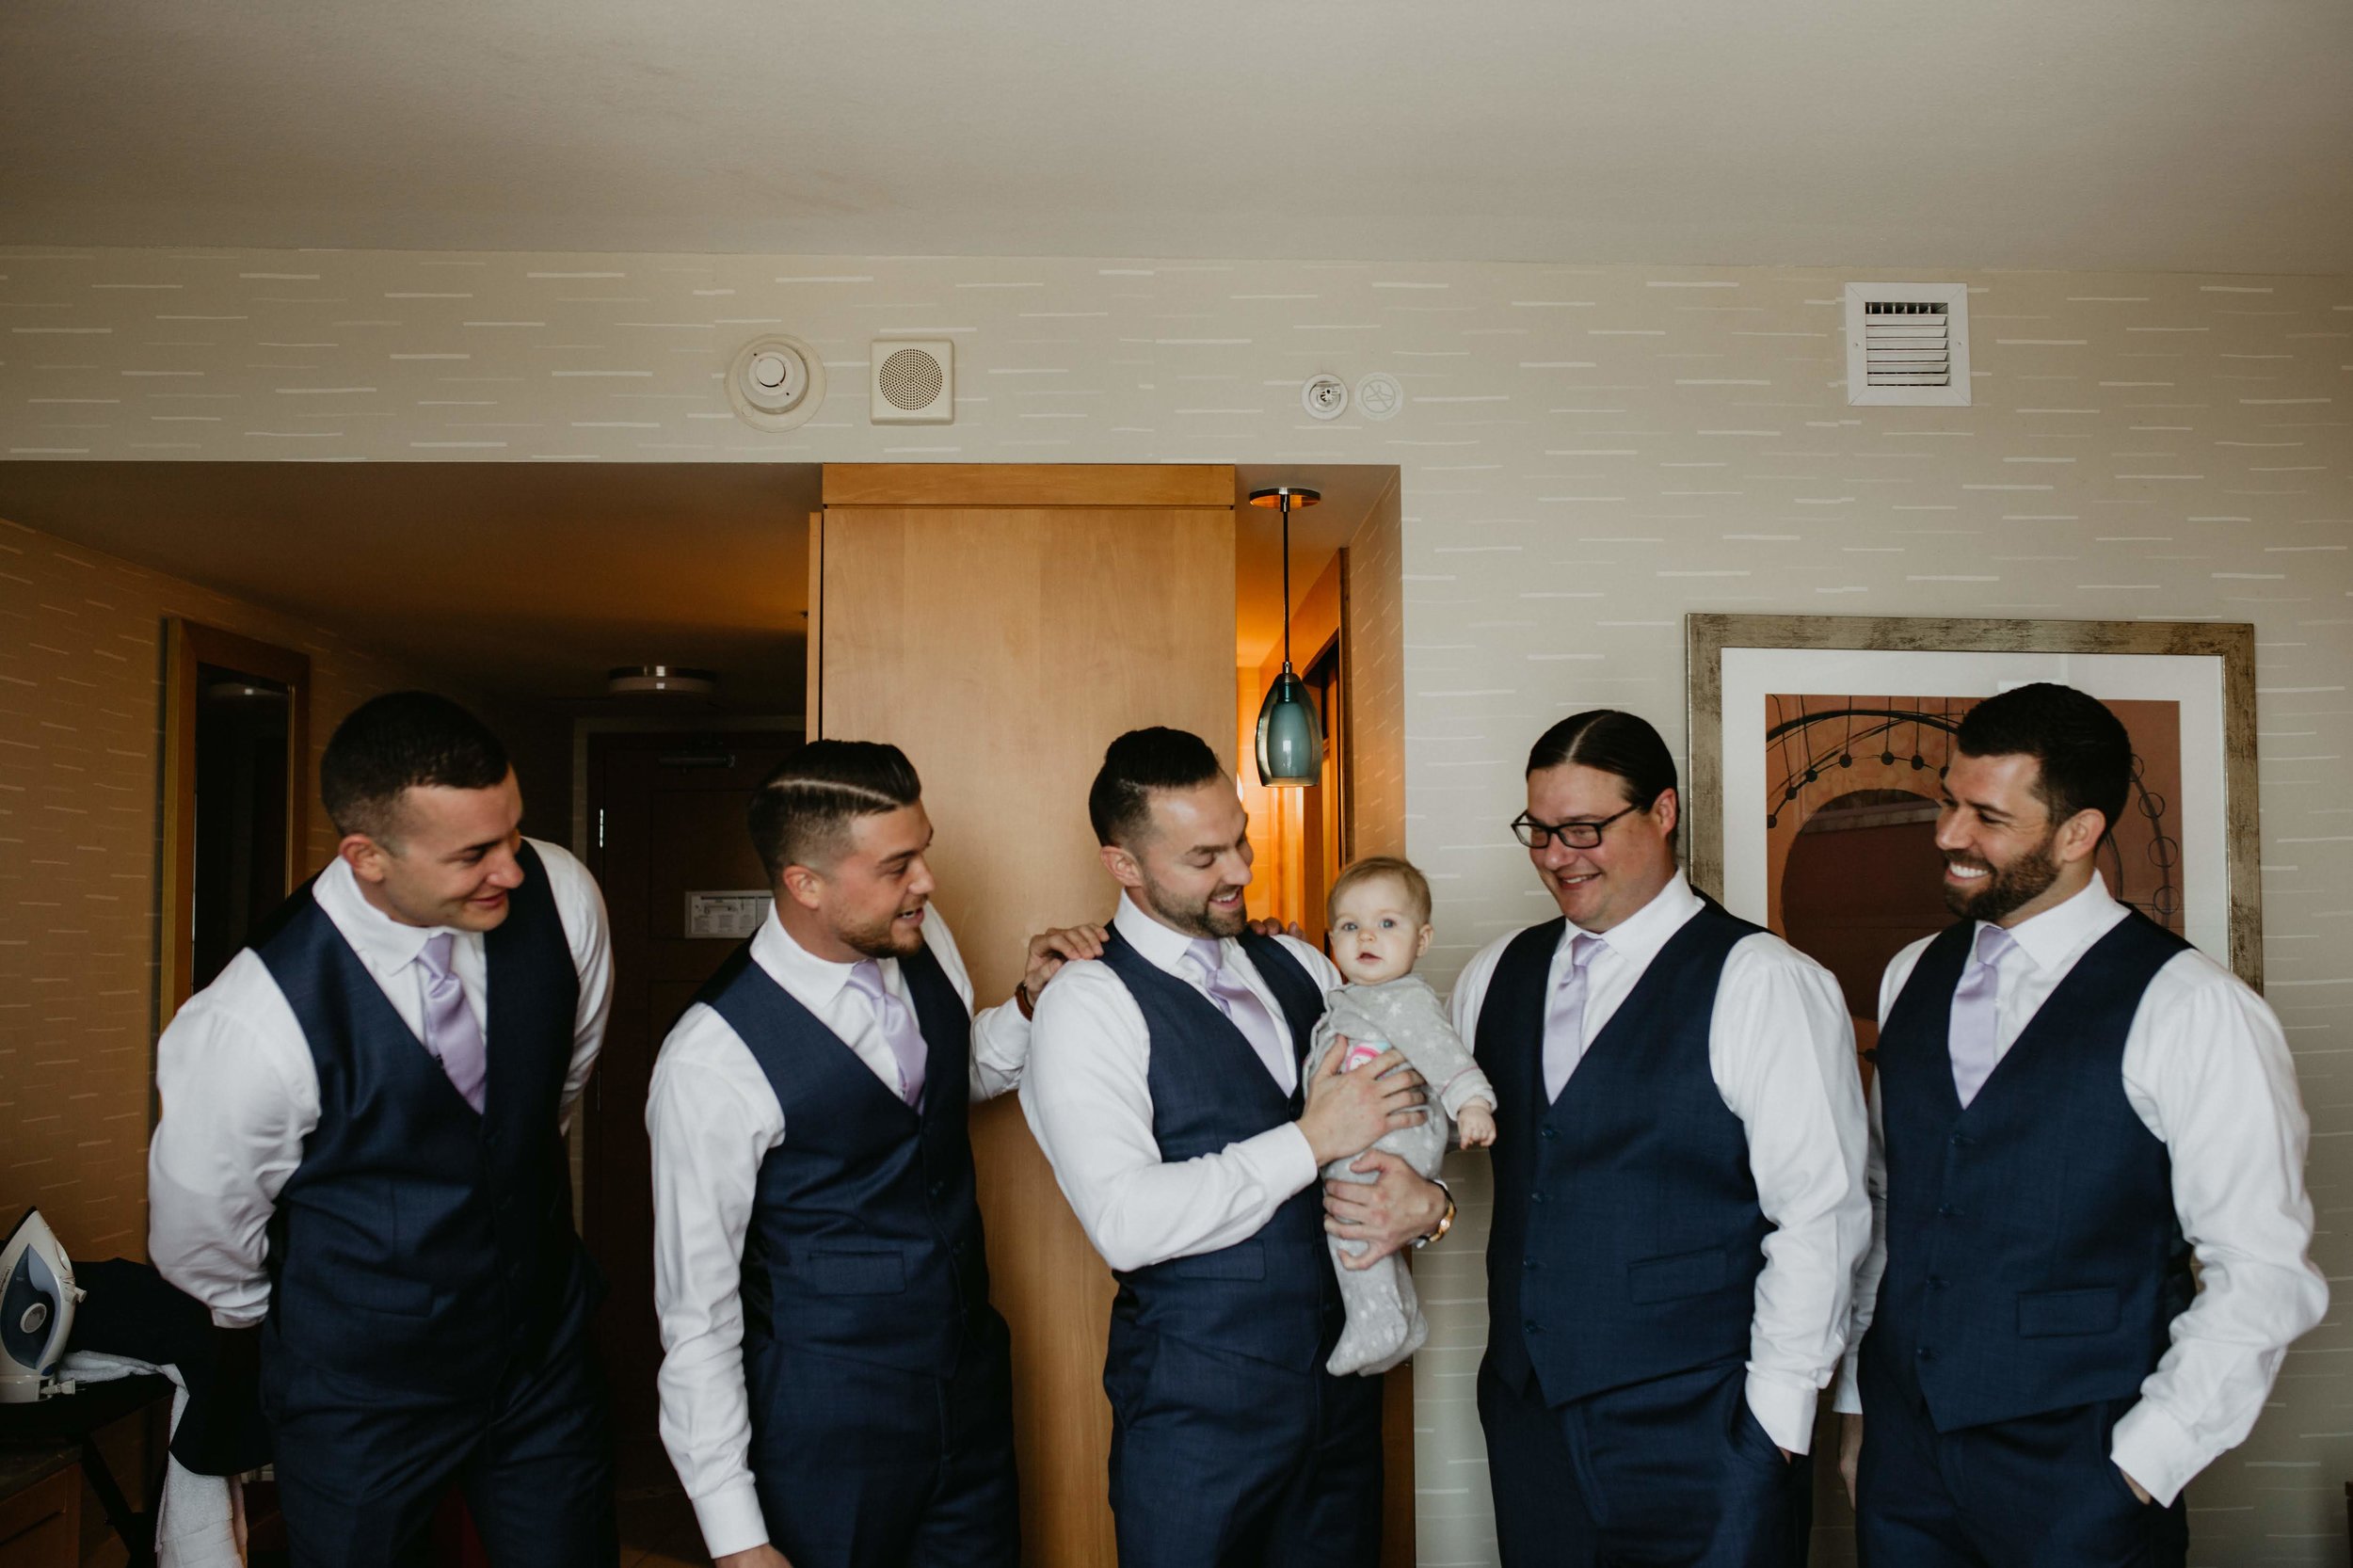 Jimmy &amp; Daryl’s daughter, Eastyn, definitely stole the show throughout the wedding day!